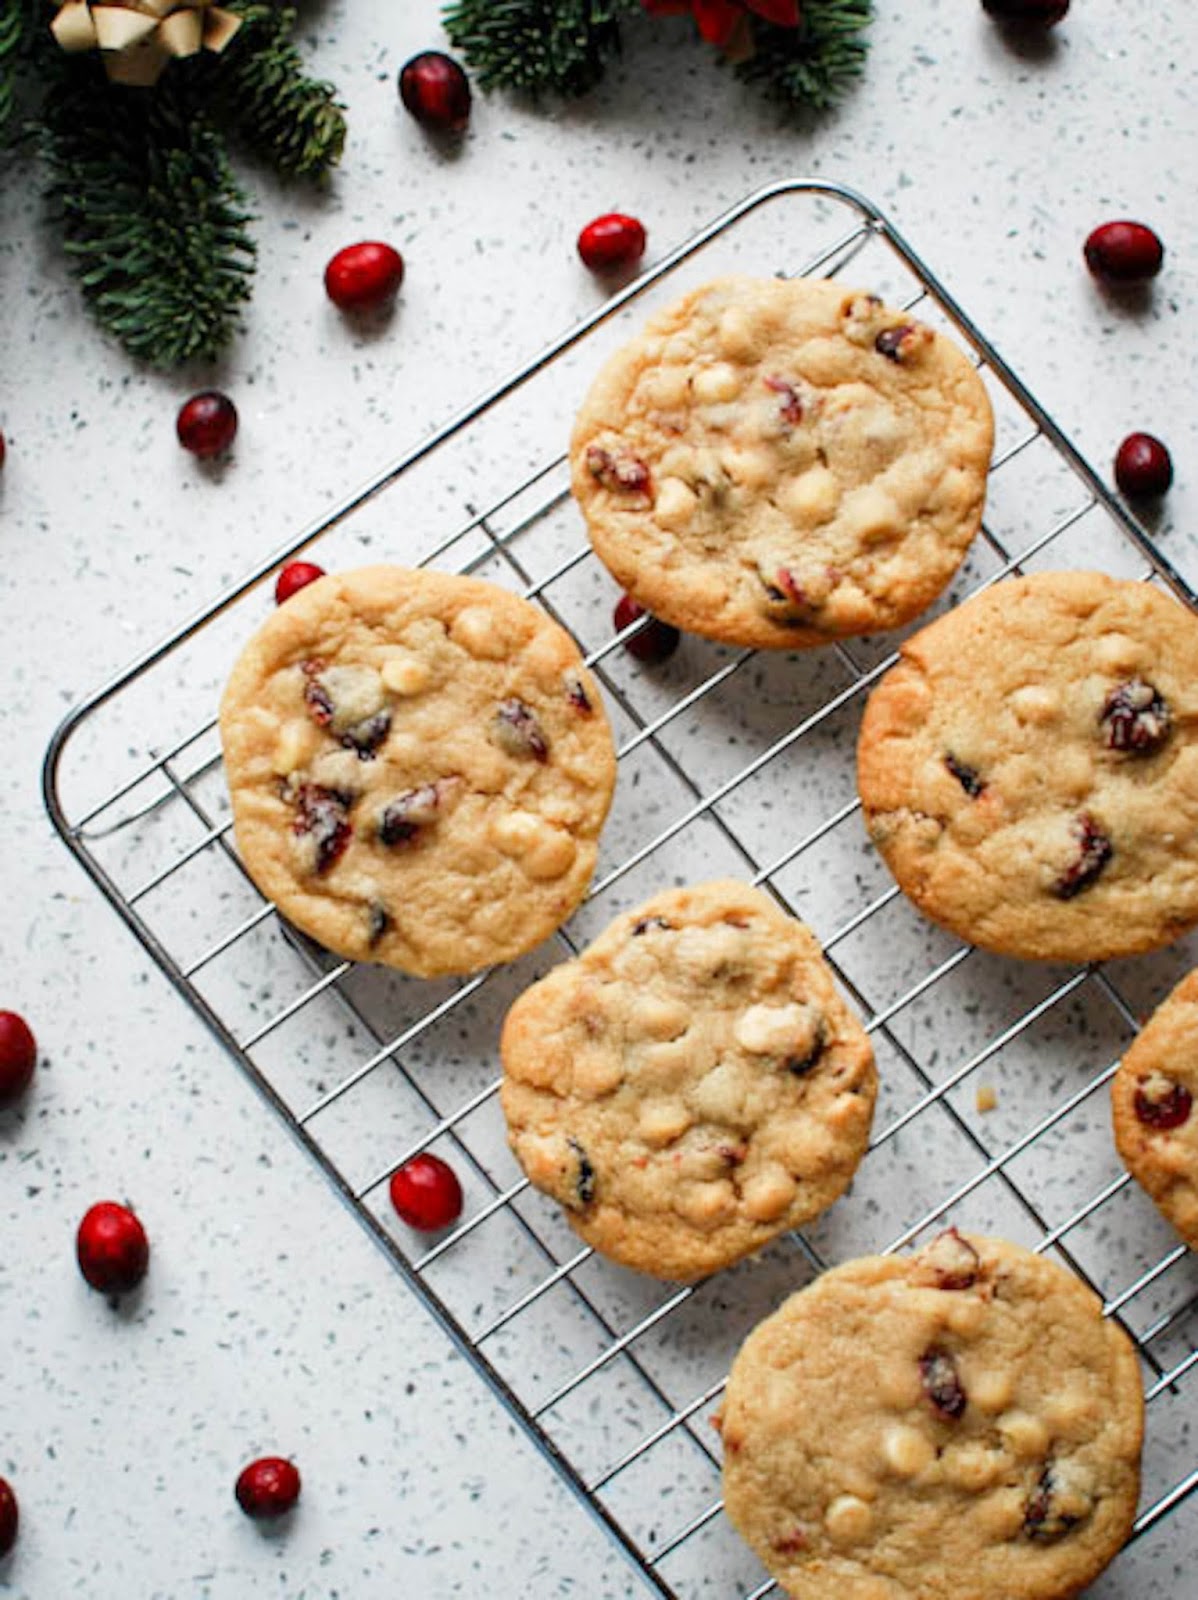 Give Santa a break from mince pies this Christmas and bake up a batch of these cranberry and white chocolate cookies instead.